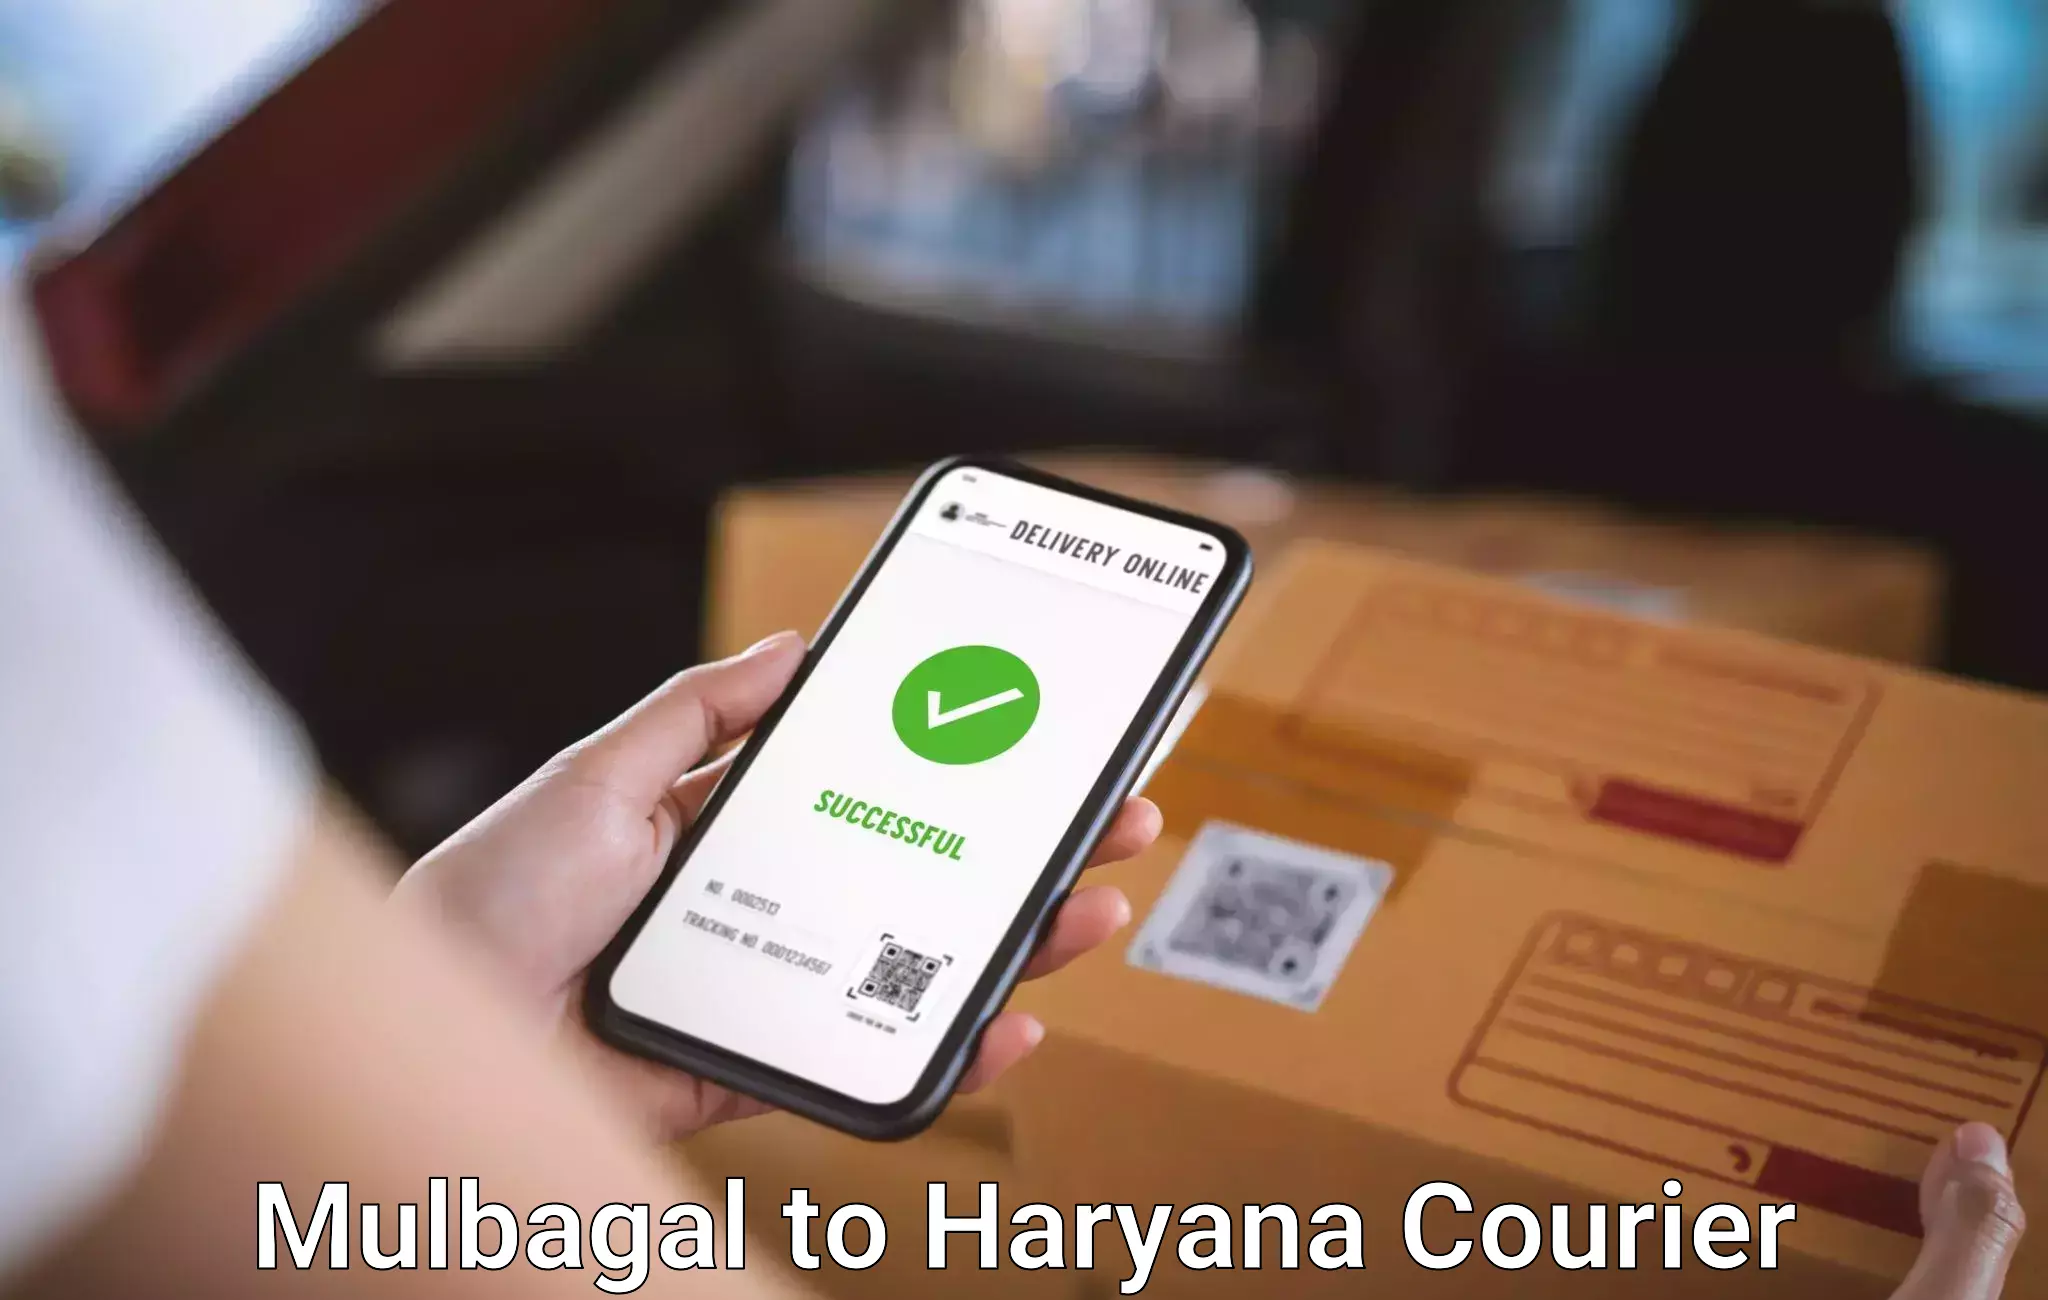 Luggage shipment specialists Mulbagal to Haryana